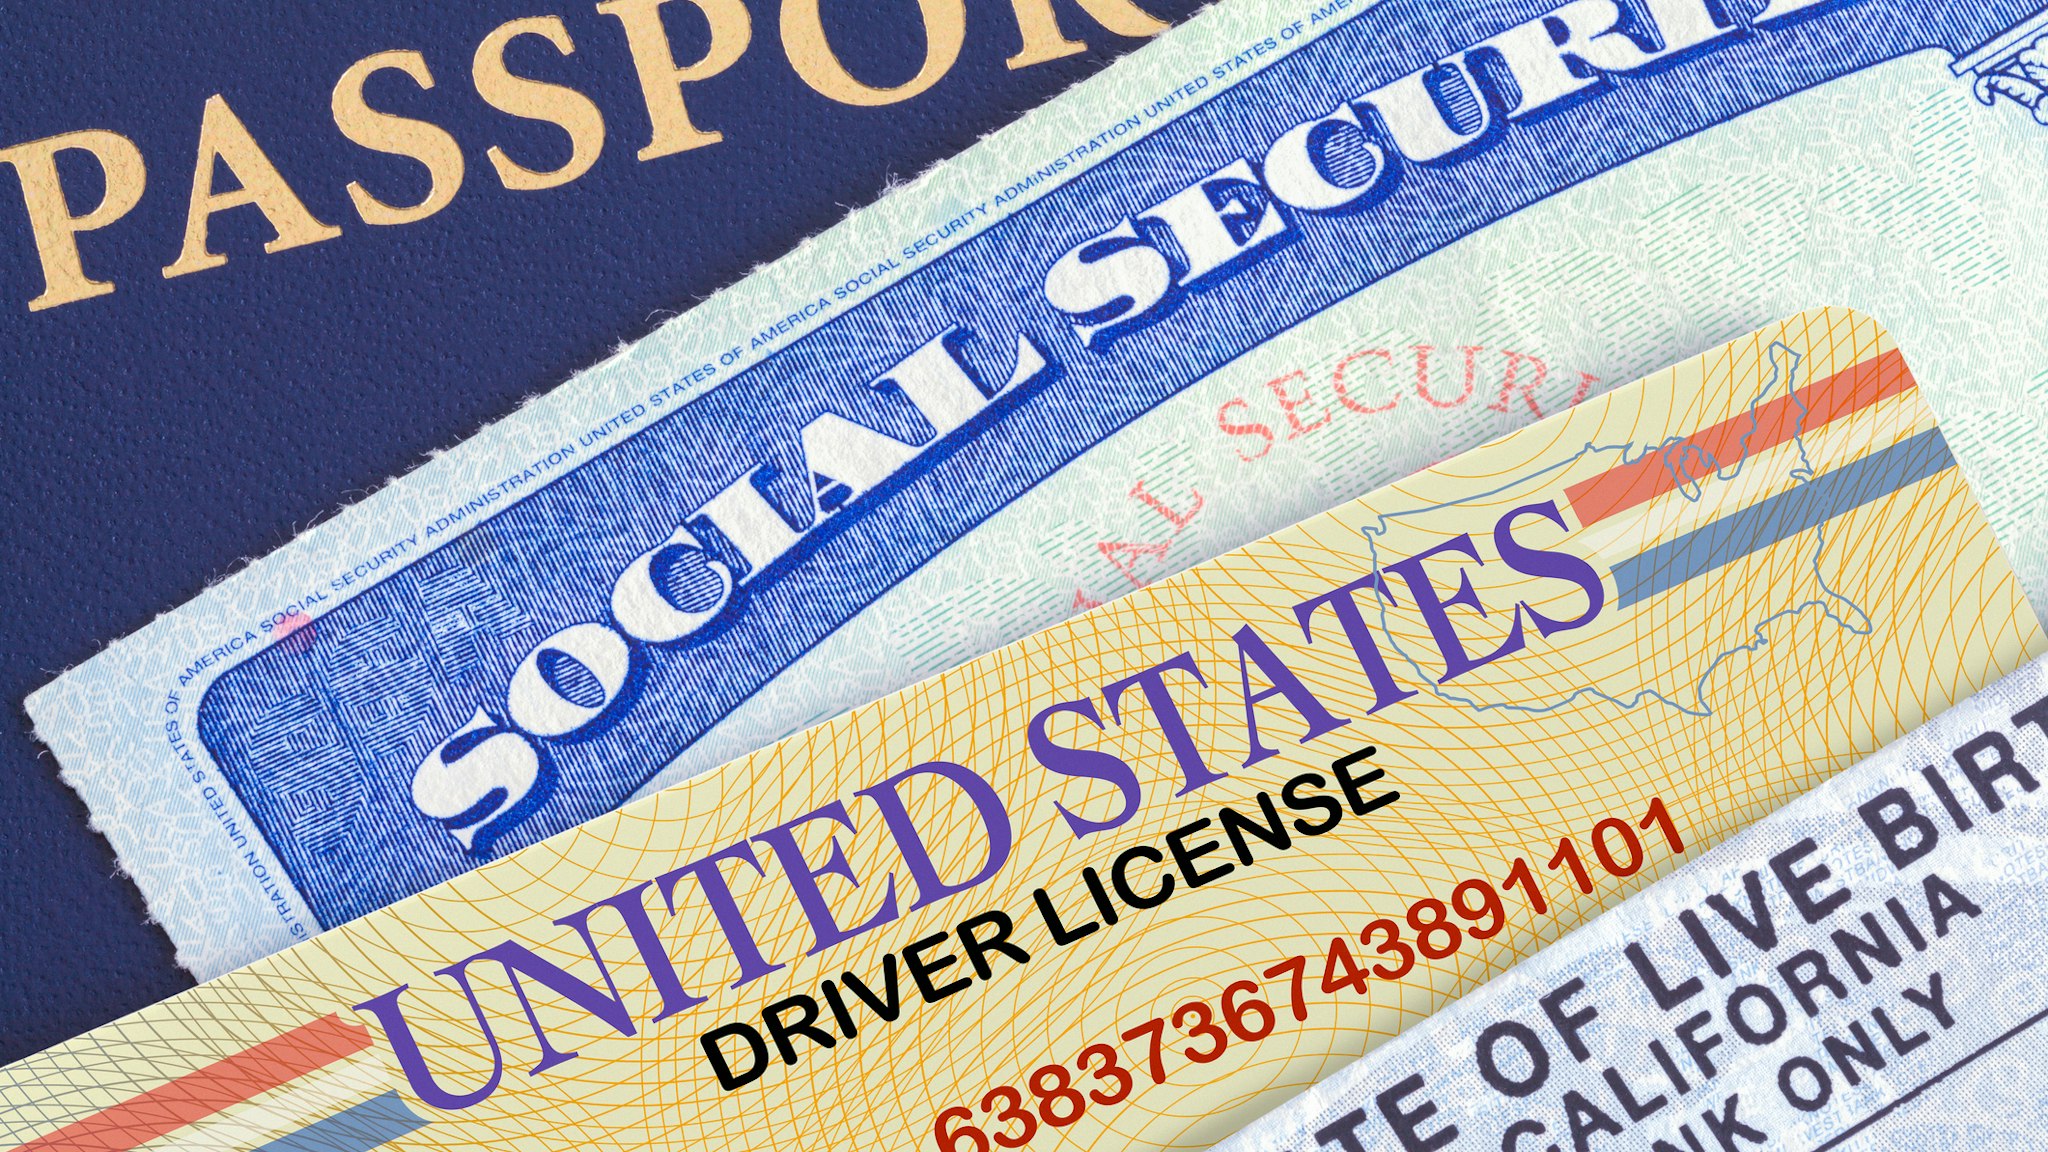 USA Passport with Social Security Card, Drivers License and Birth Certificate.